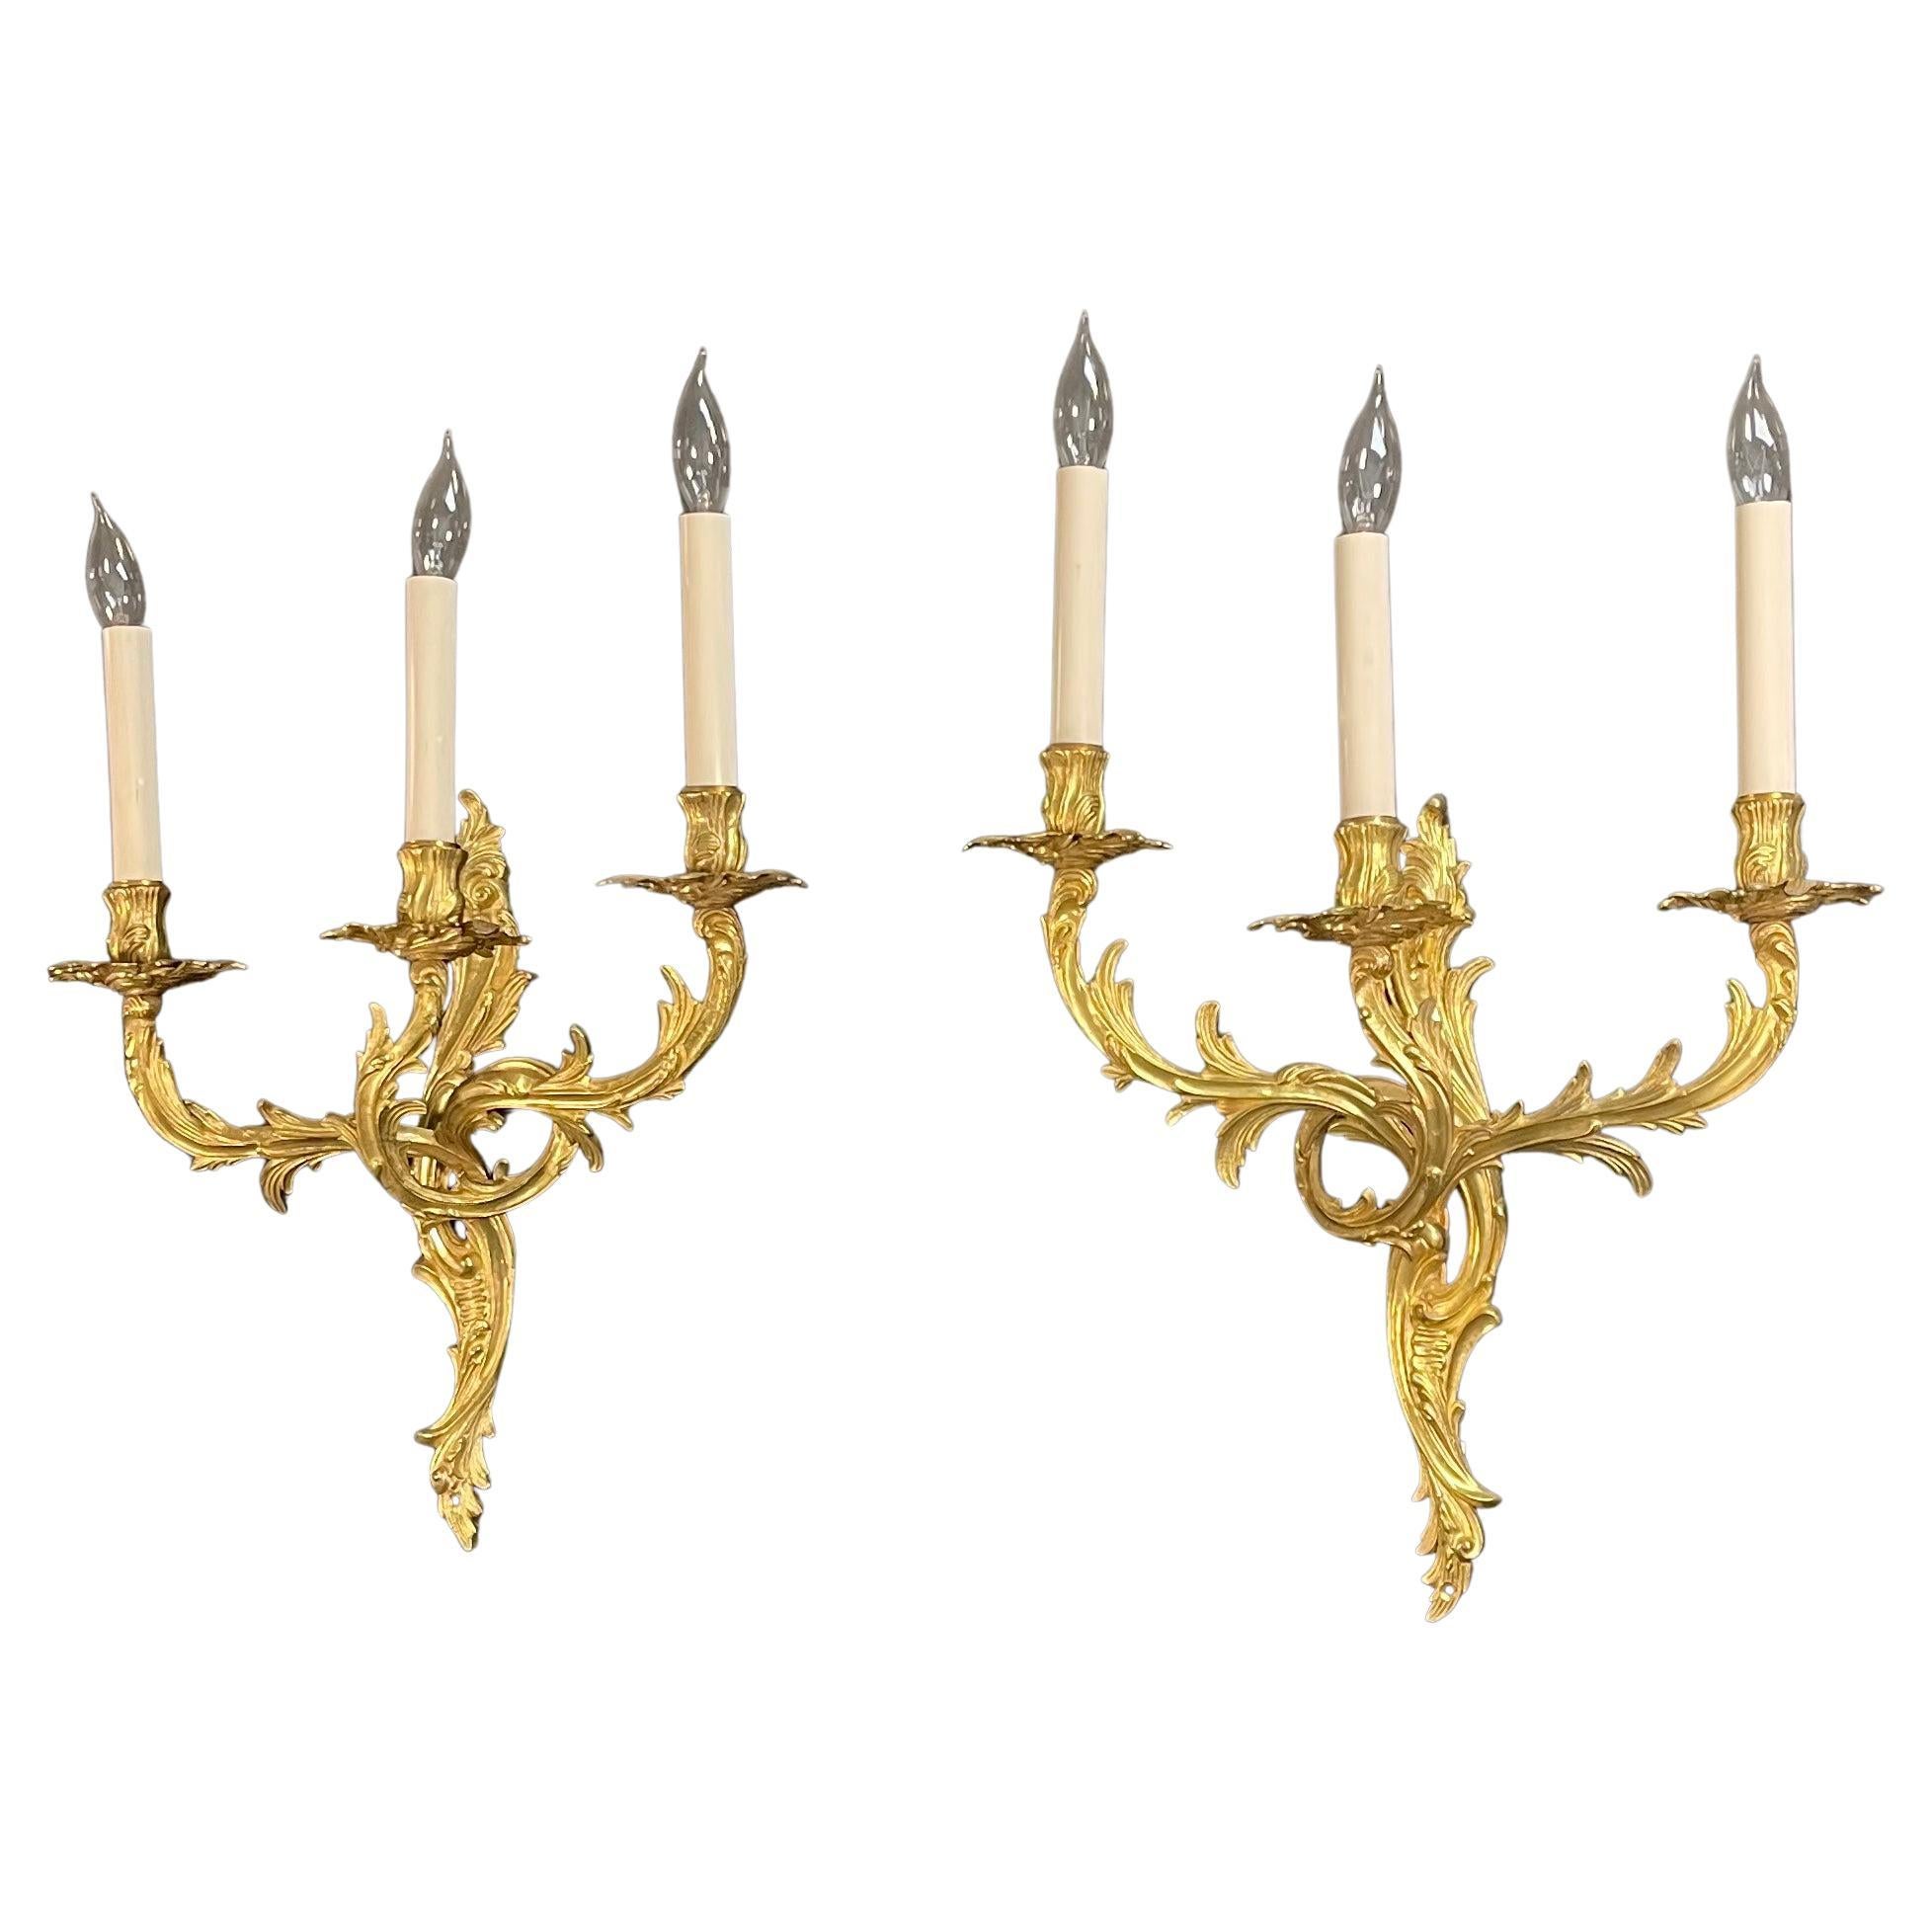 Pair of Louis XV Style Gilt-Bronze Wall Sconces